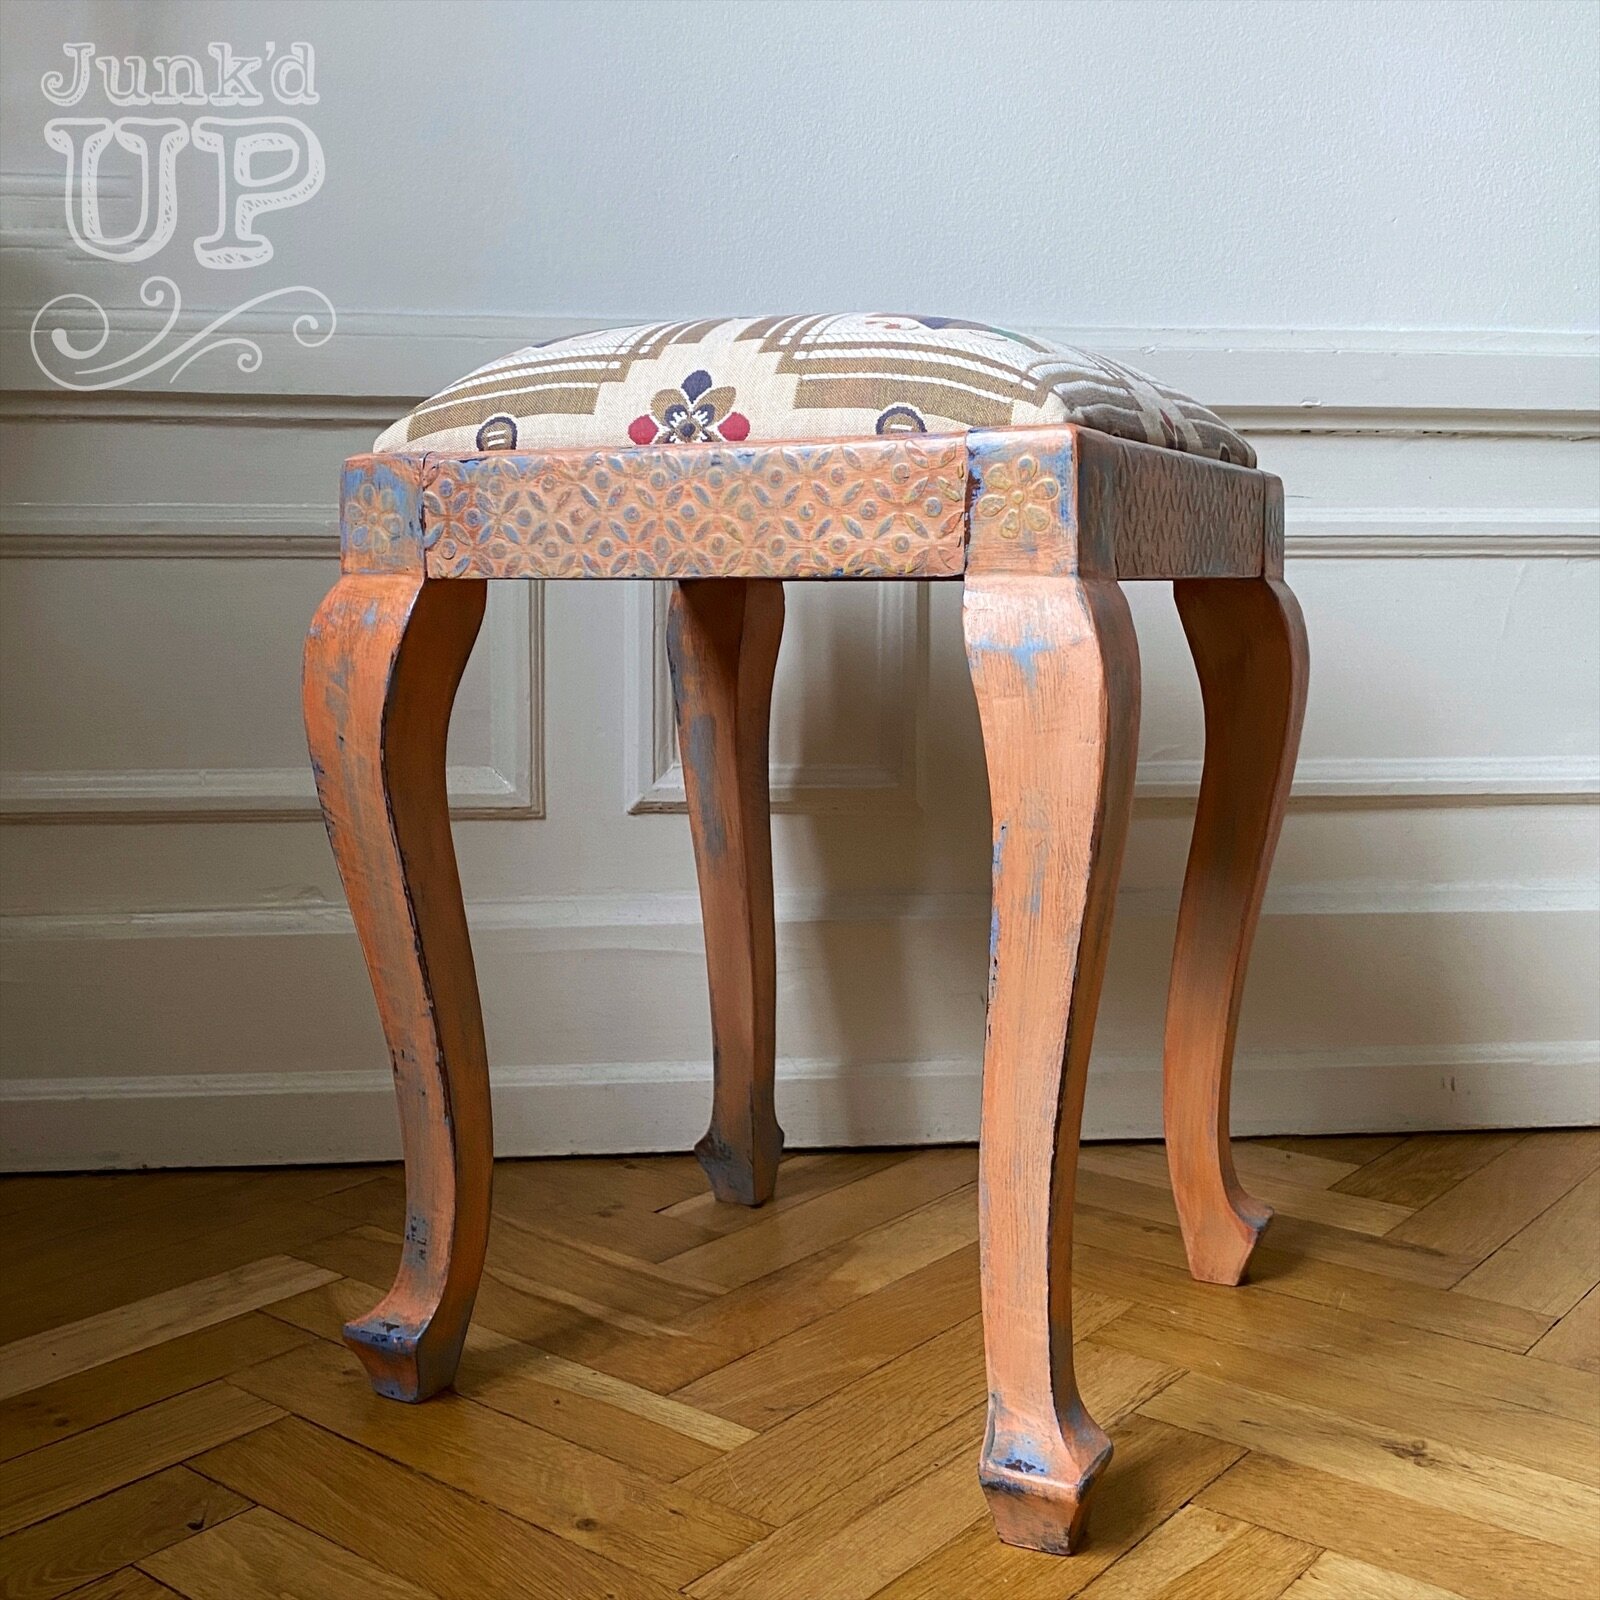 Vintage Stool in Coral and Blue